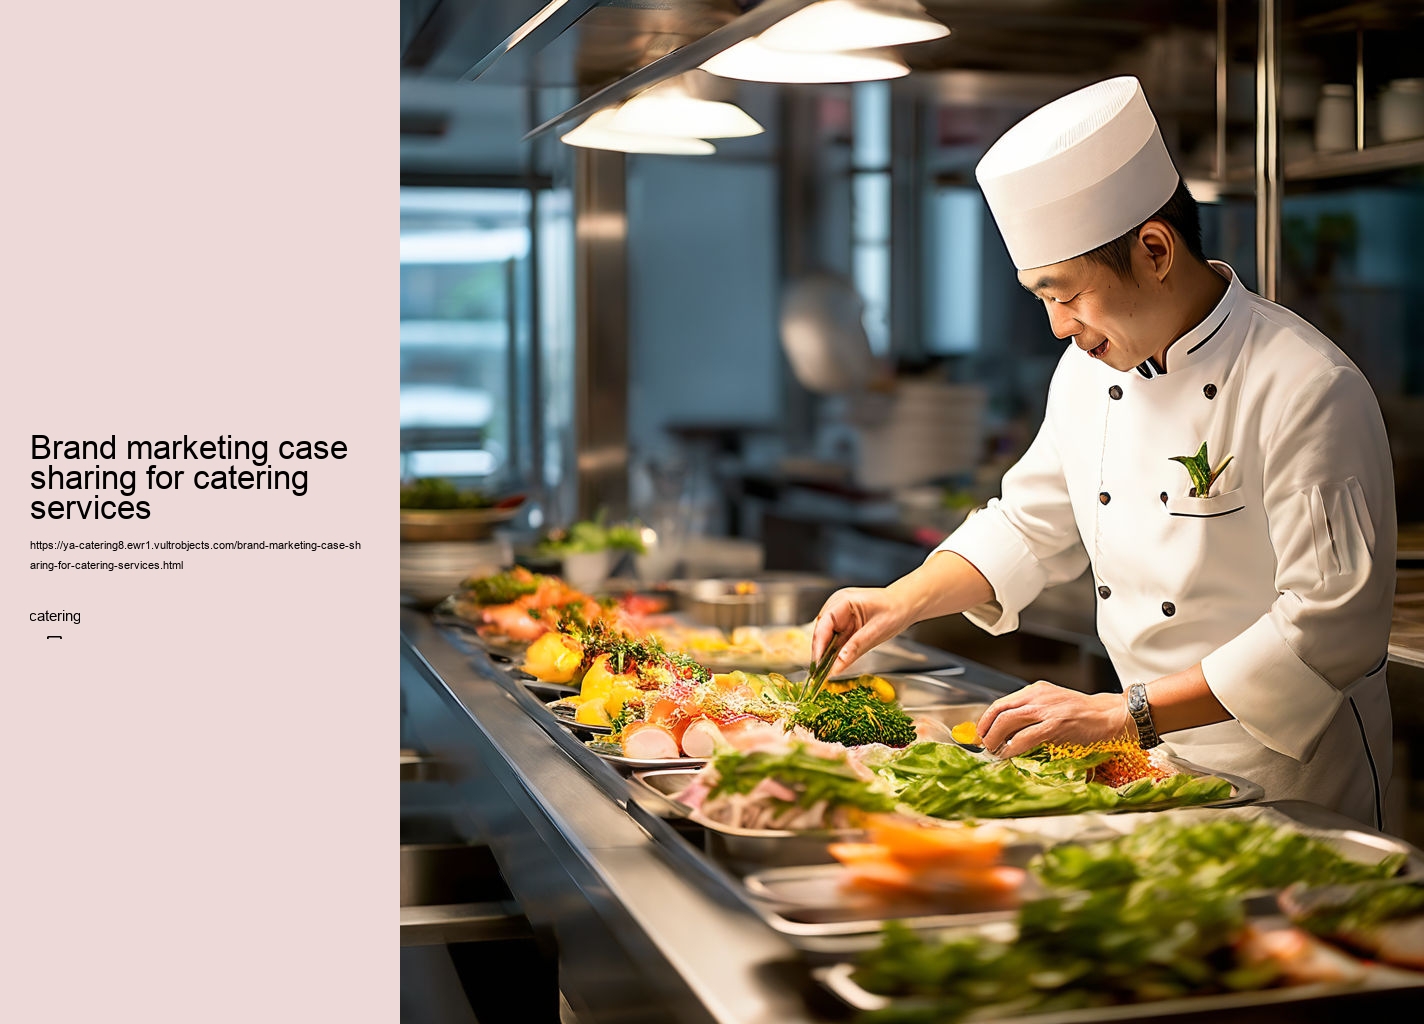 Brand marketing case sharing for catering services